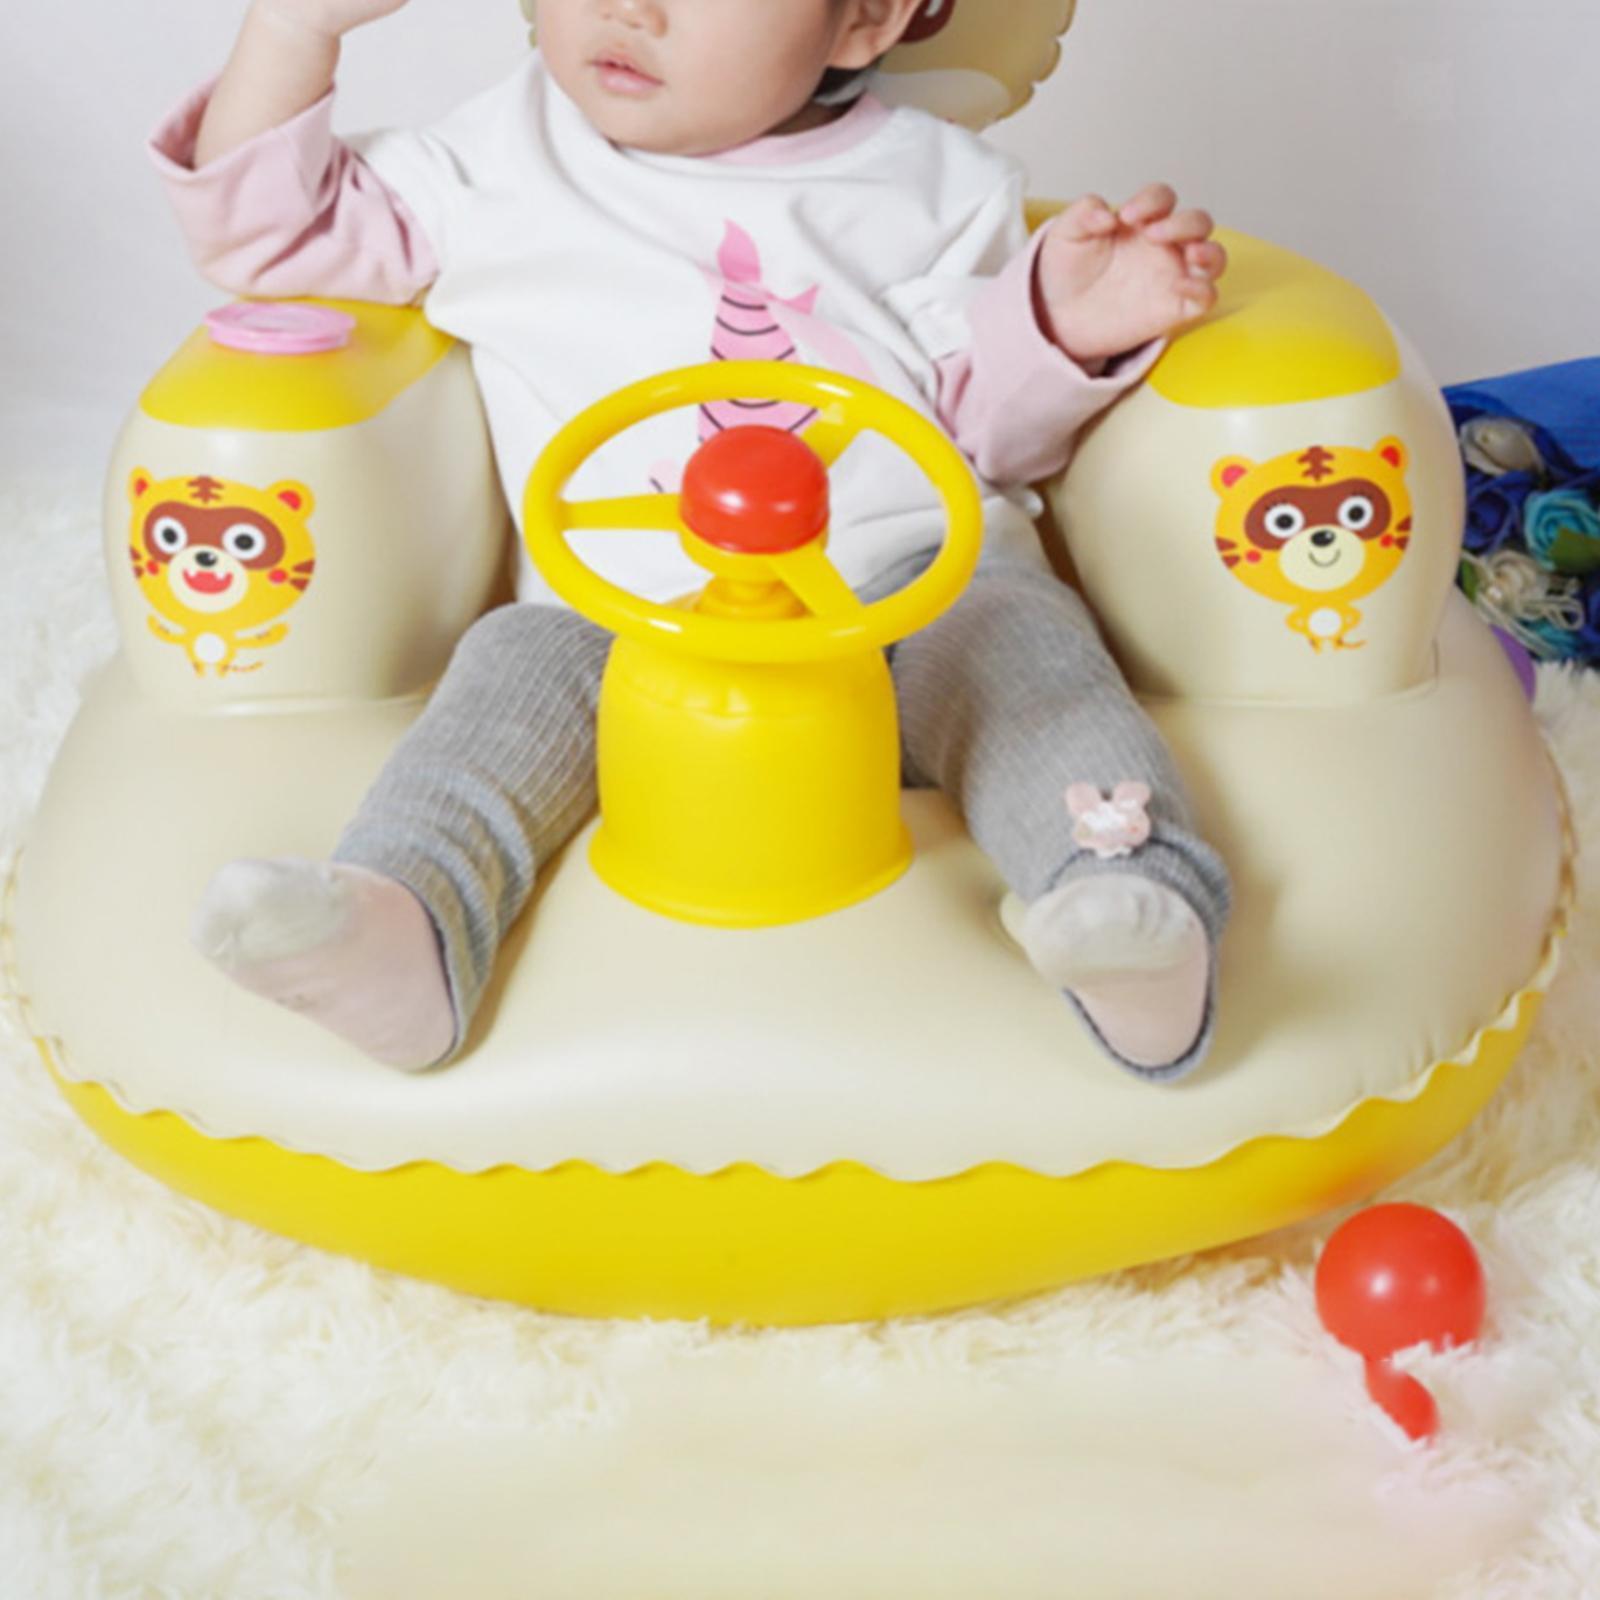 Baby Inflatable Seat Children Playing Game Toys For Learning Sitting Infant